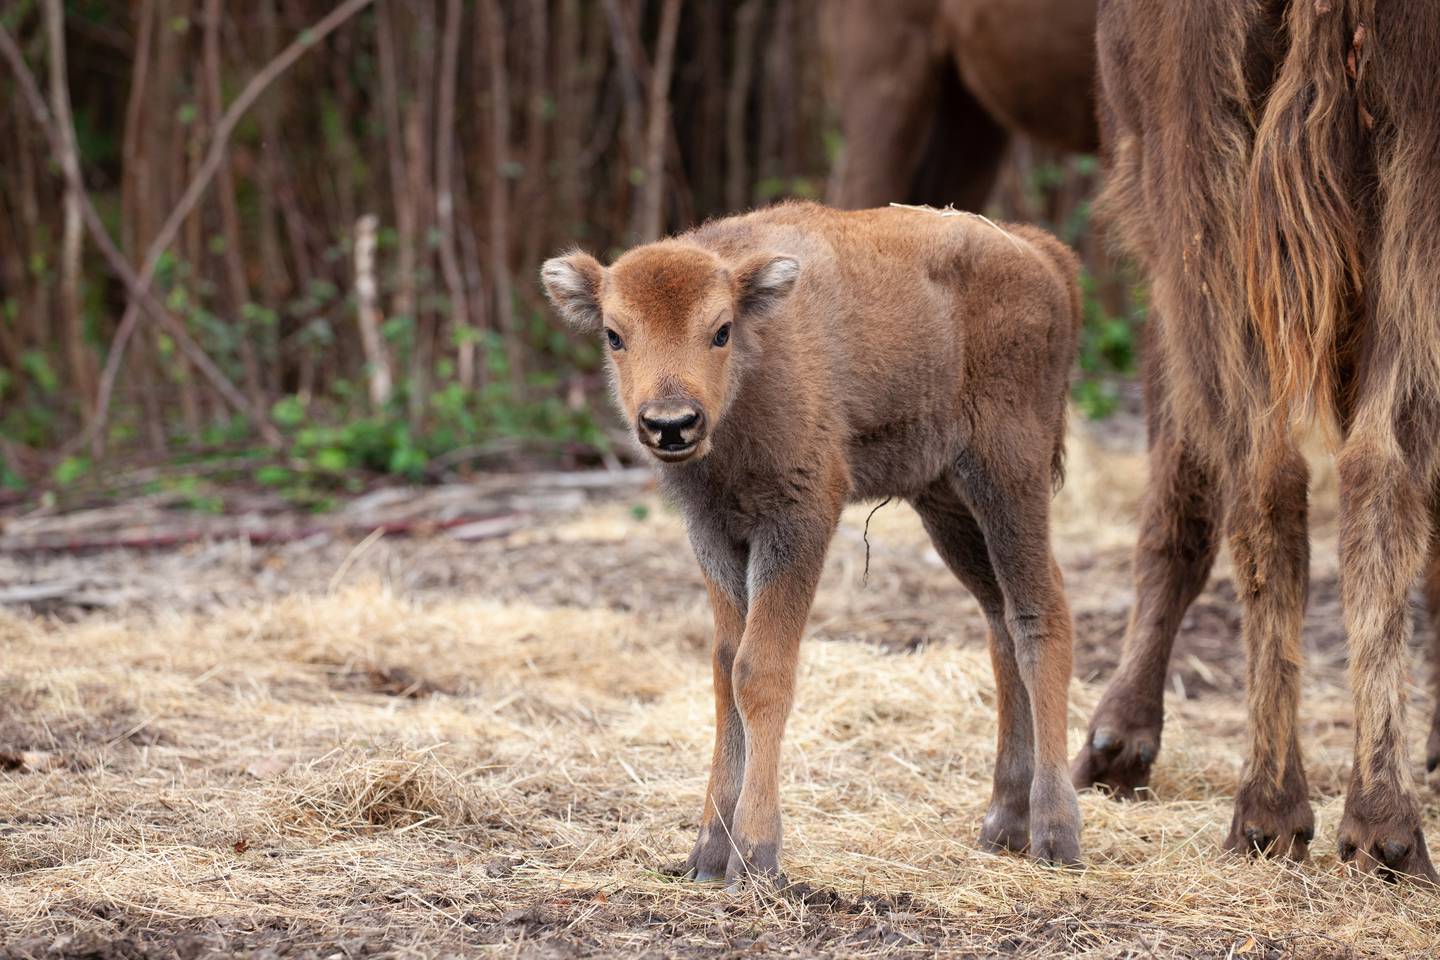 Rangers were surprised to be greeted by the UK's first Wilder Blean bison calf. PA